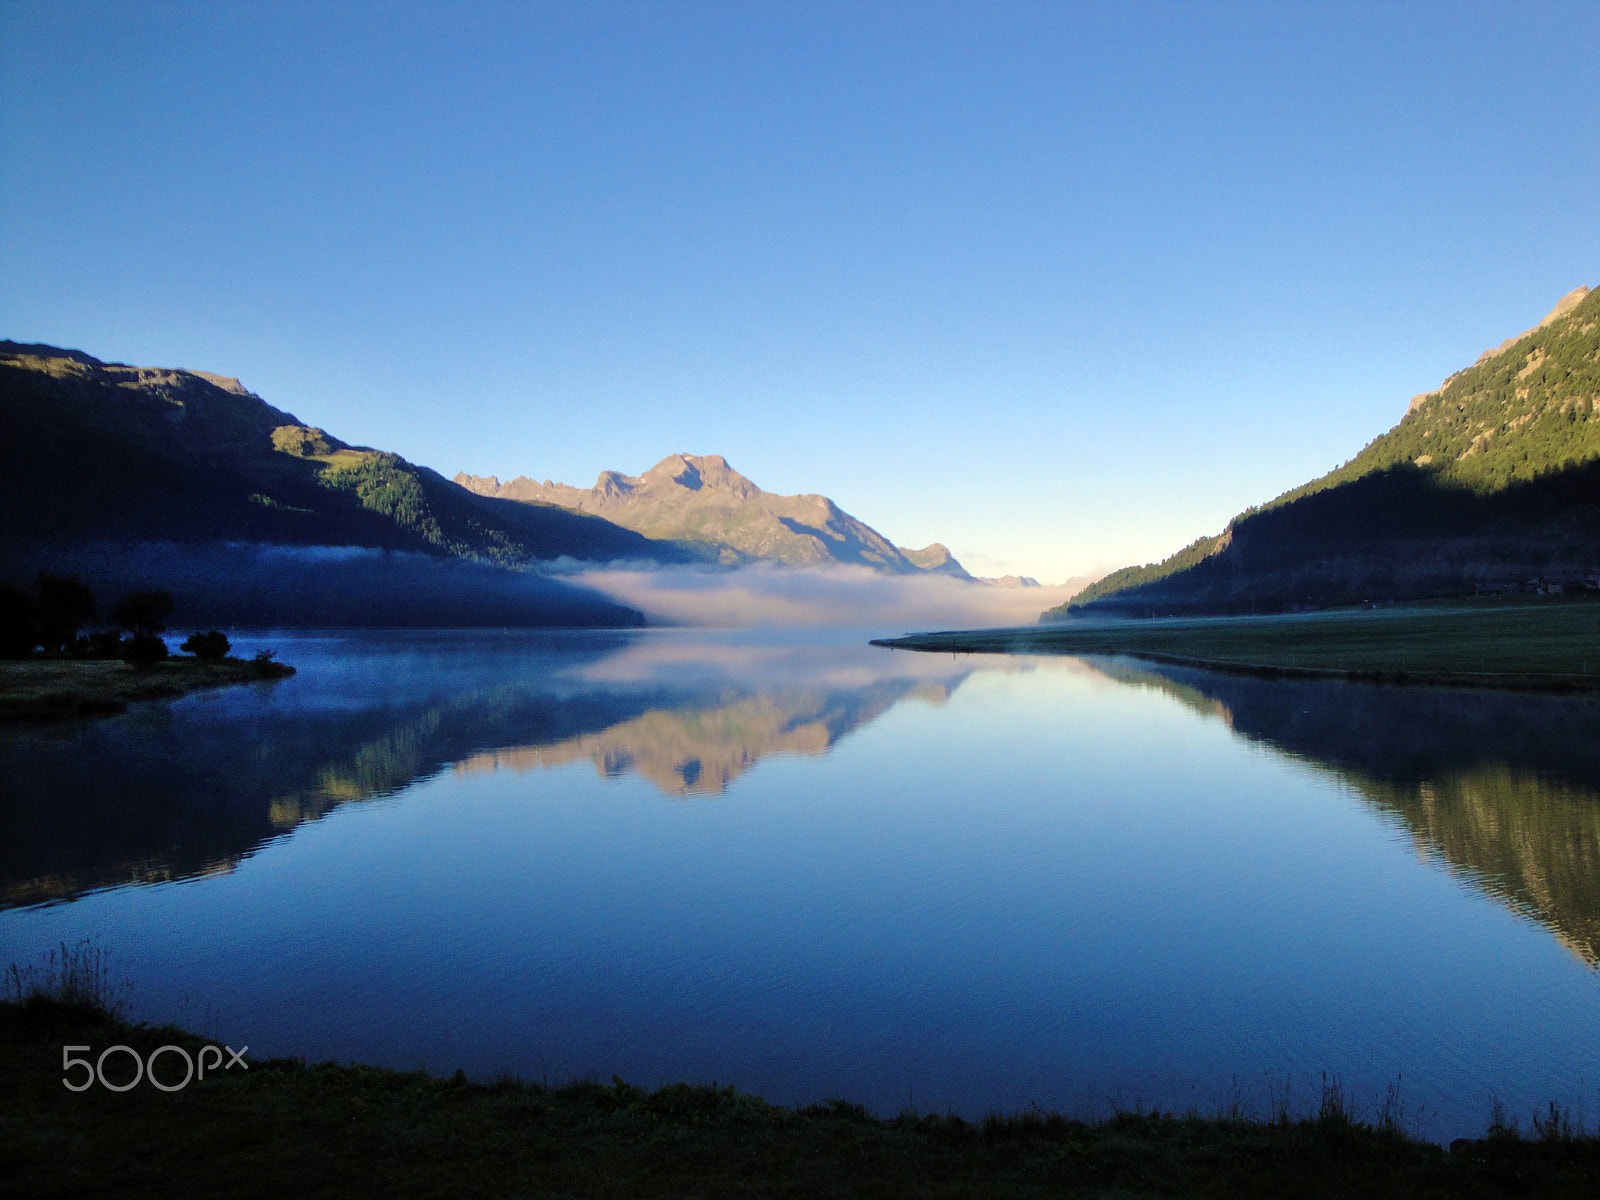 Sony DSC-W270 sample photo. Lake silvaplana - tranquility in the engadin photography